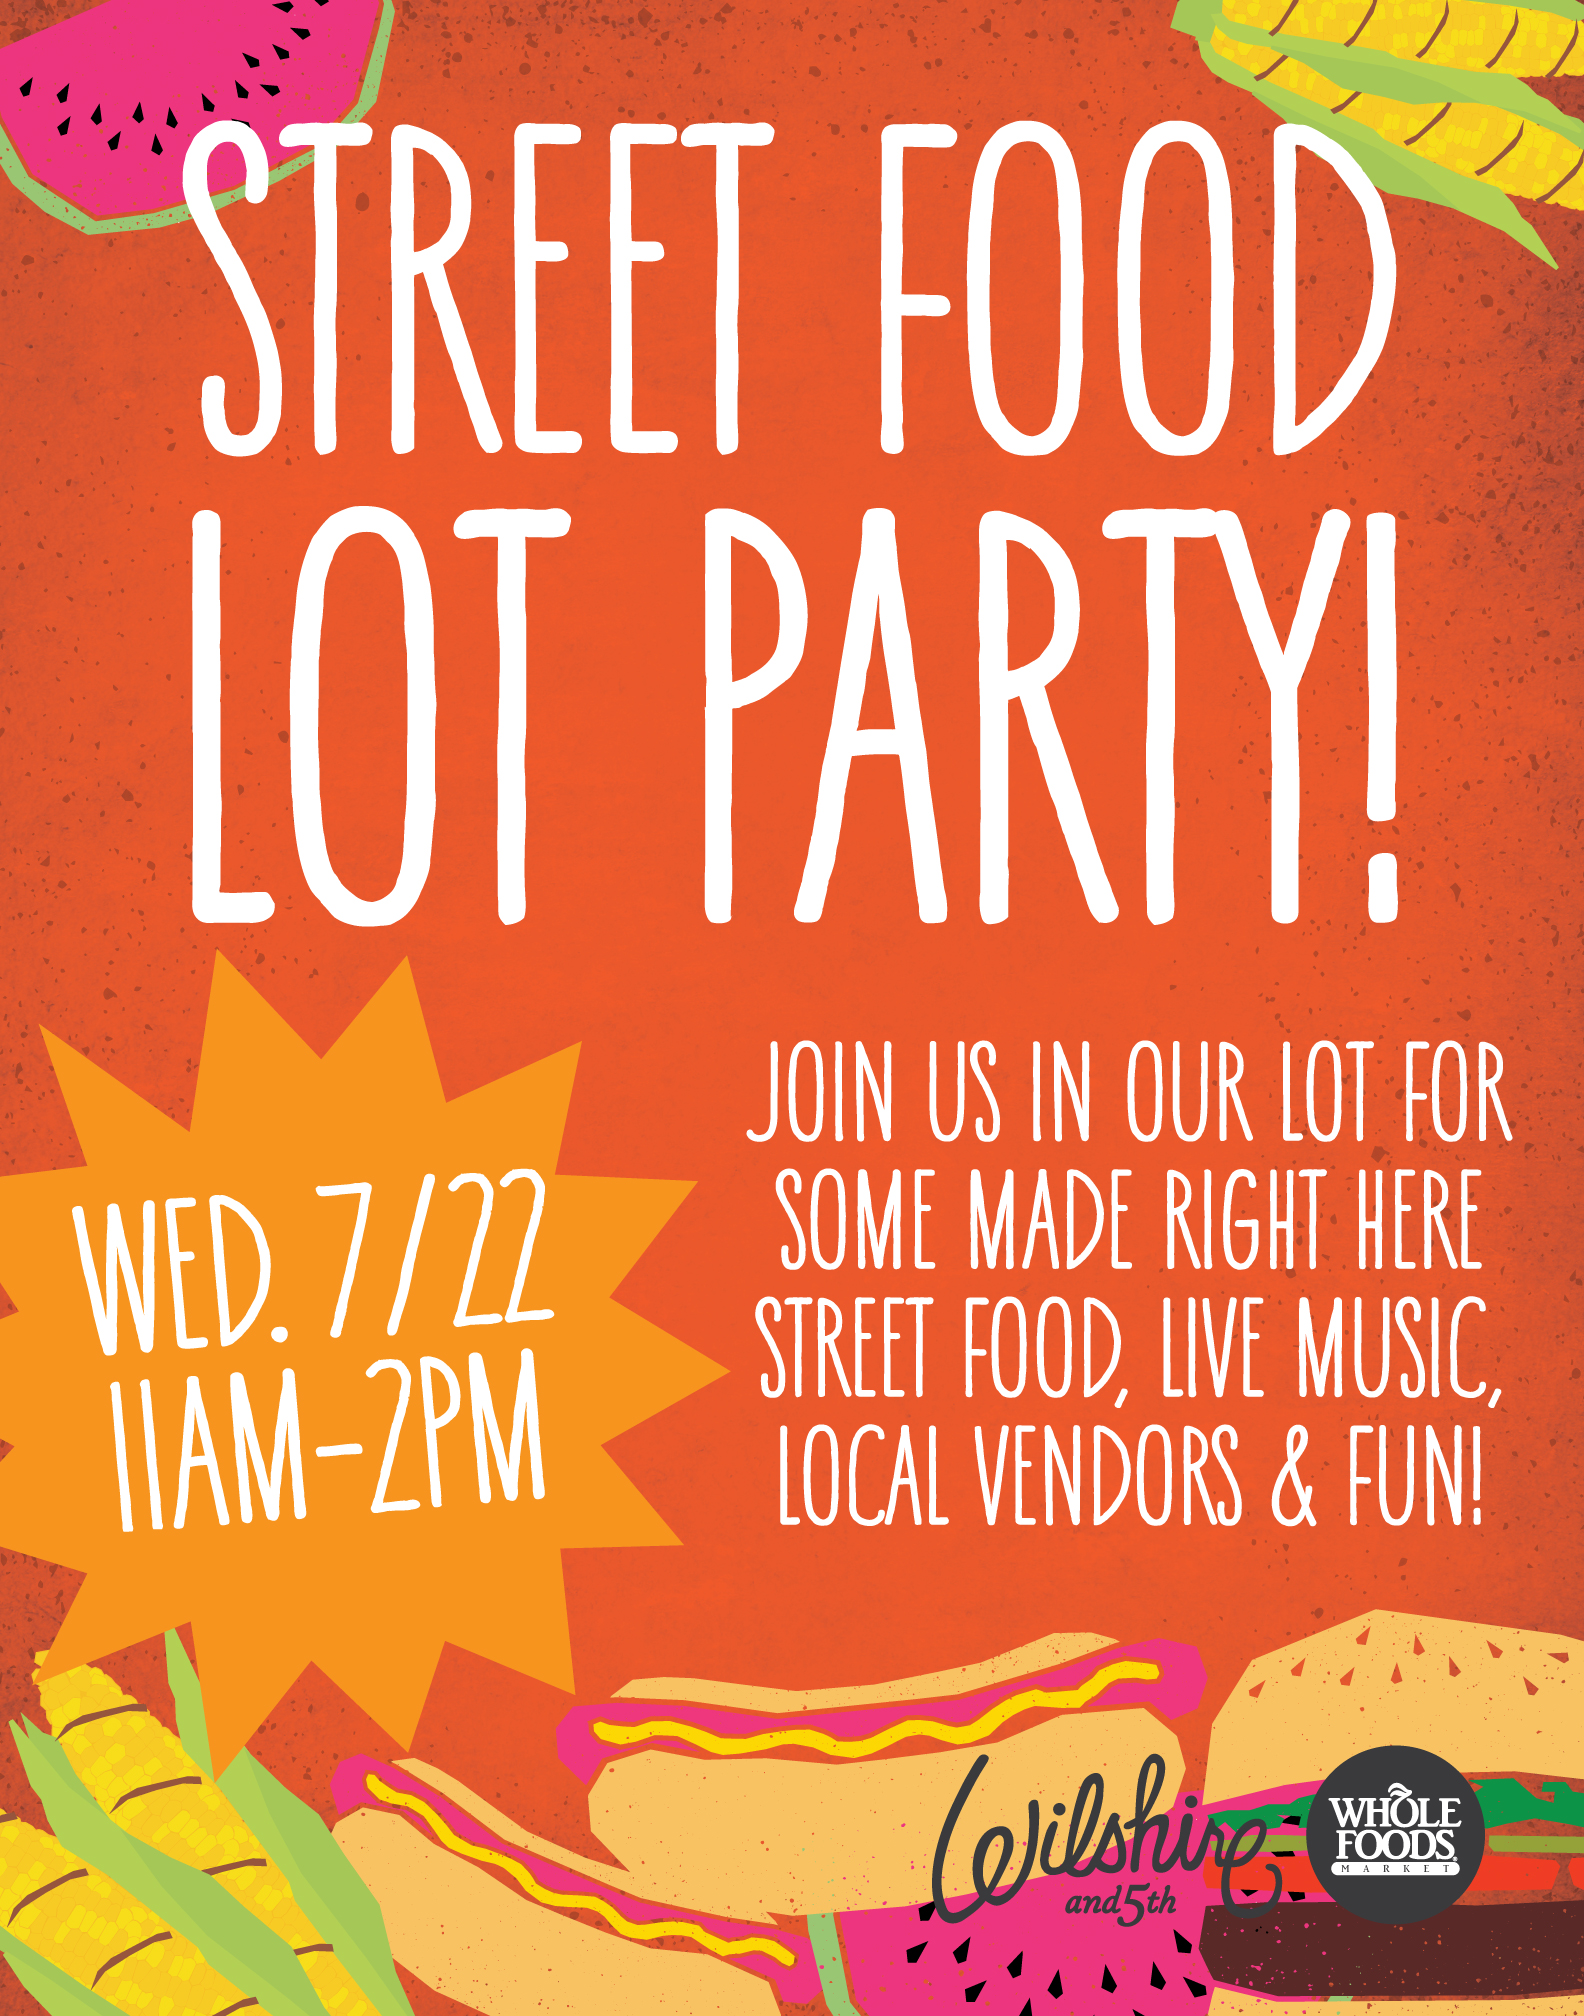 Whole Foods Market Street Food Lot Party